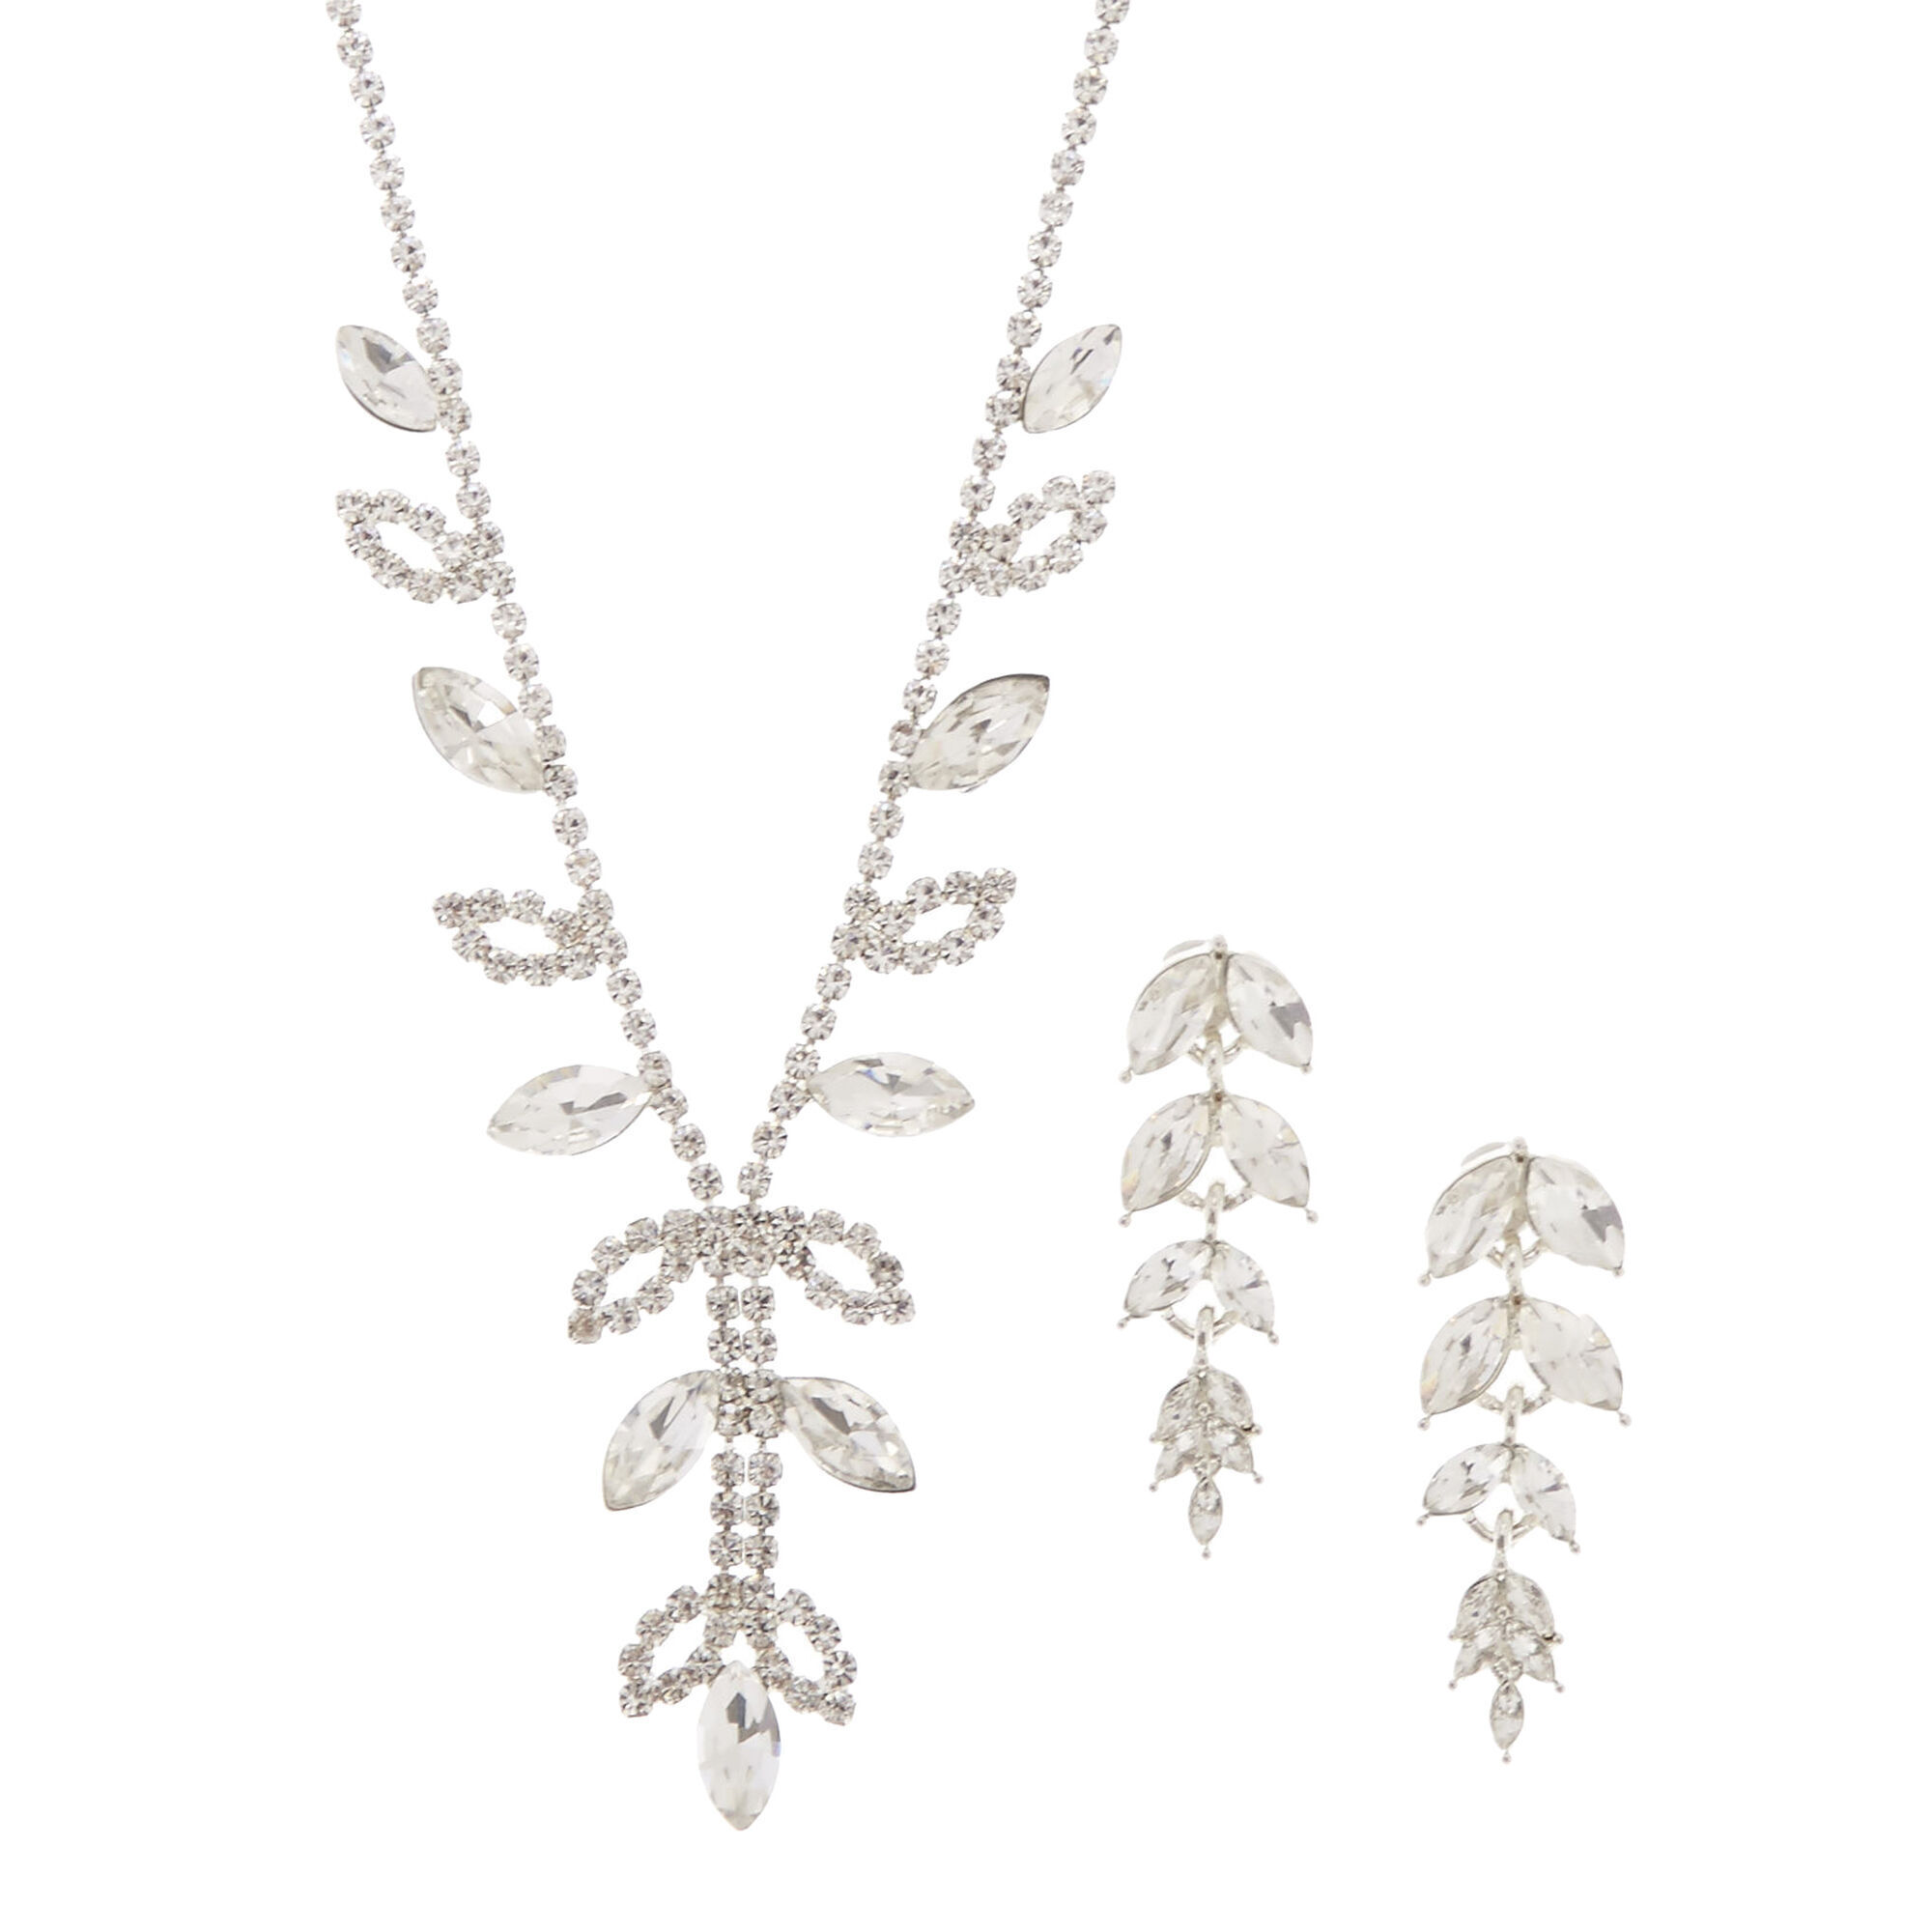 Claire's Silver Iris & Leaf Necklace & Drop Earrings Set - 2 Pack